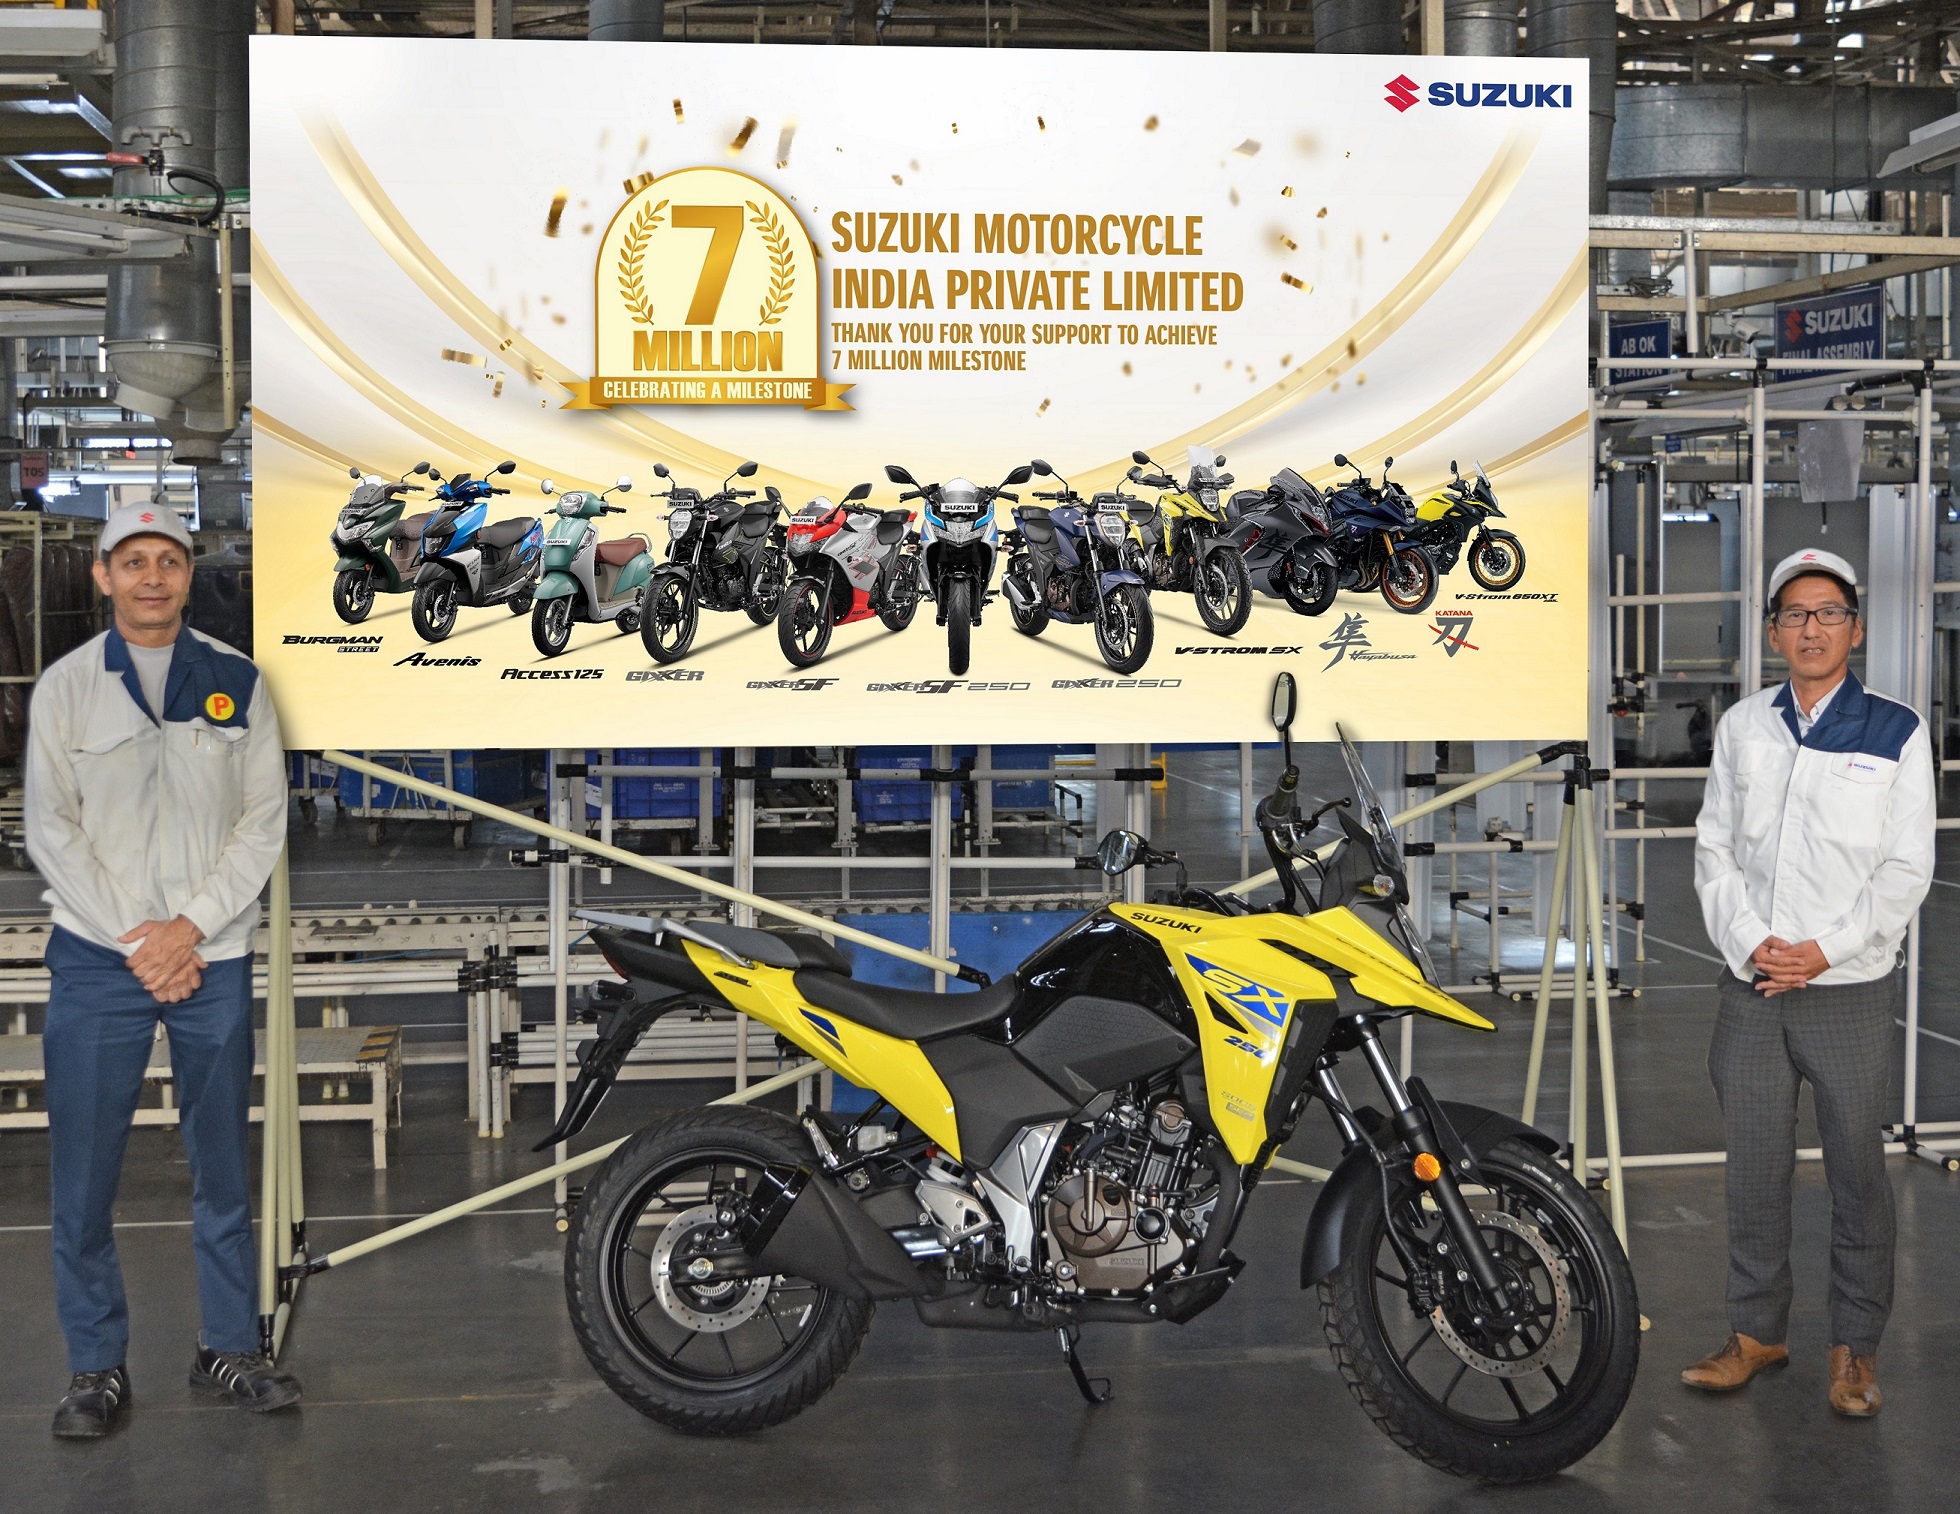 Suzuki Motorcycle India rolls out its 7 millionth vehicle